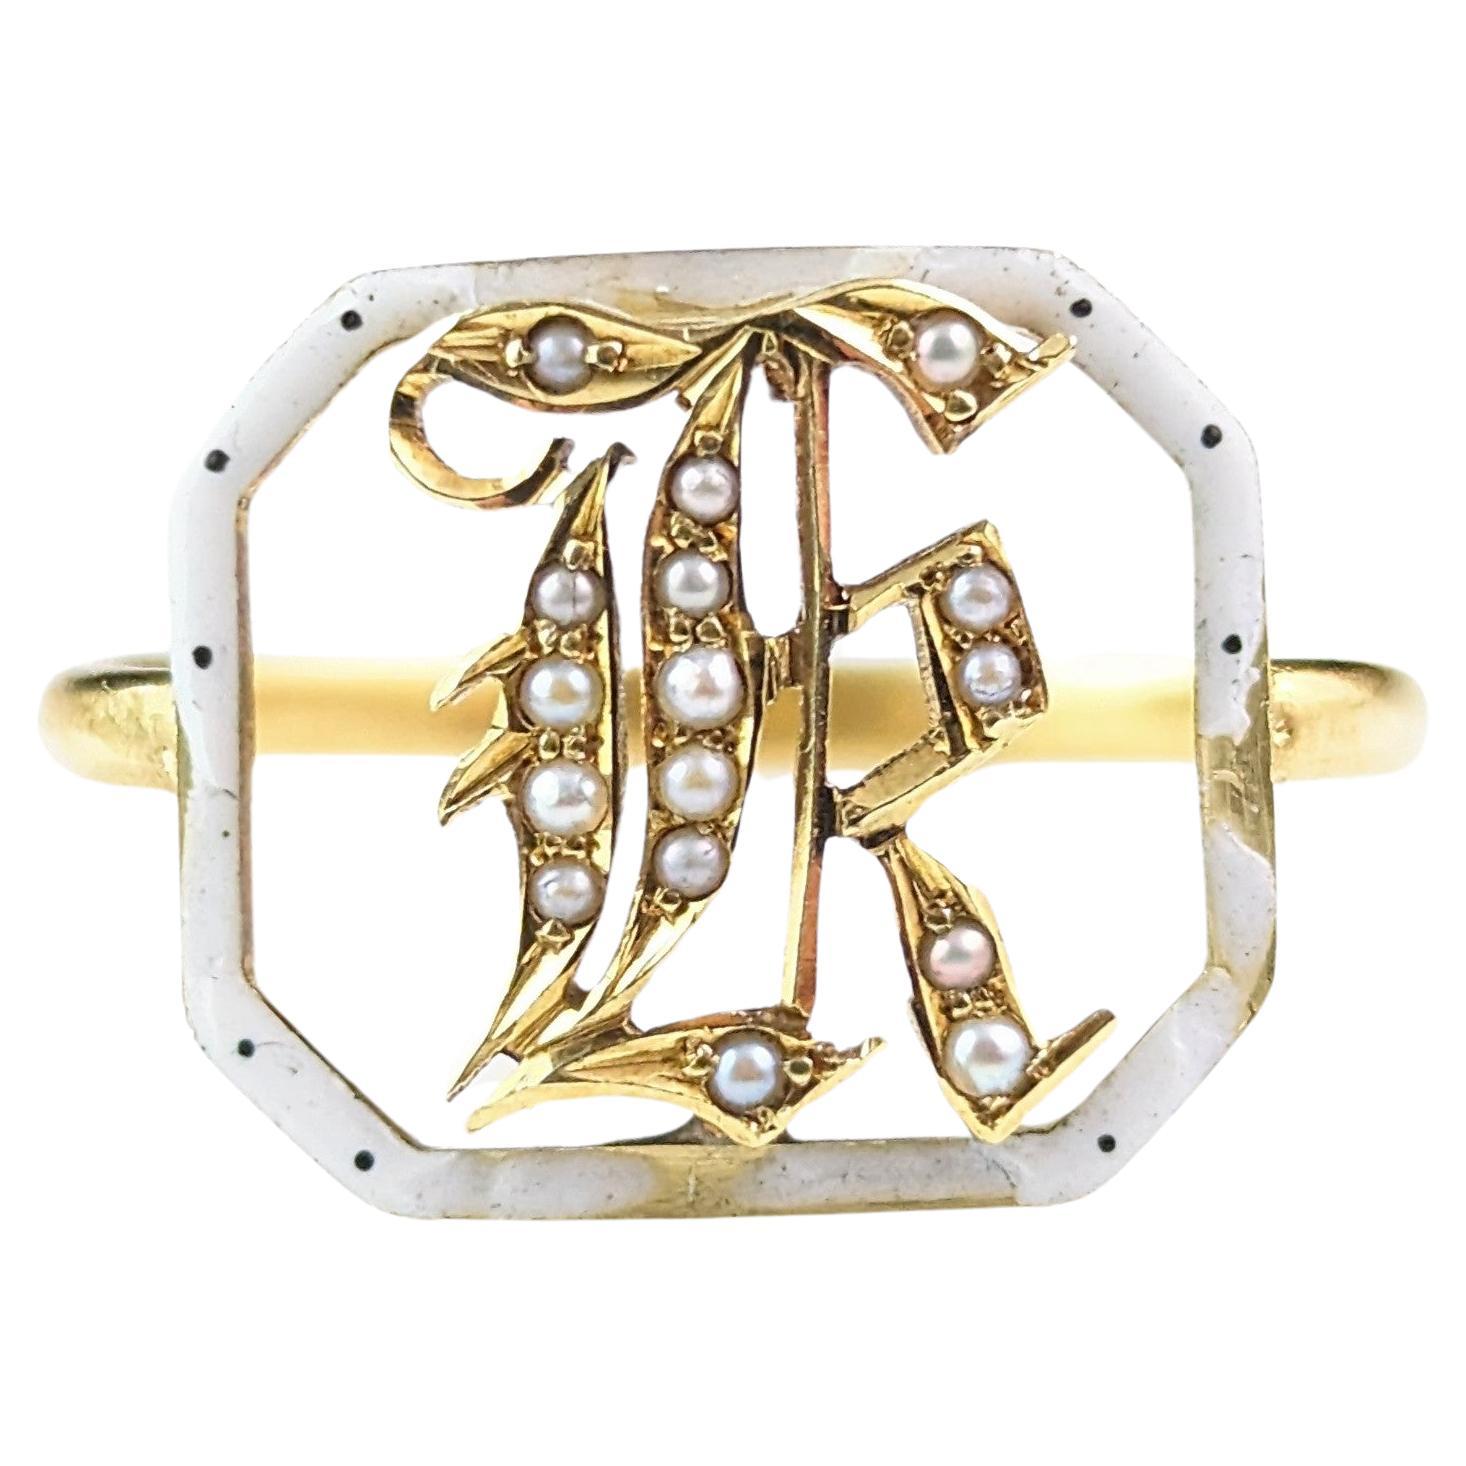 Antique French 18k gold and Pearl letter K ring, White Enamel, Conversion piece 